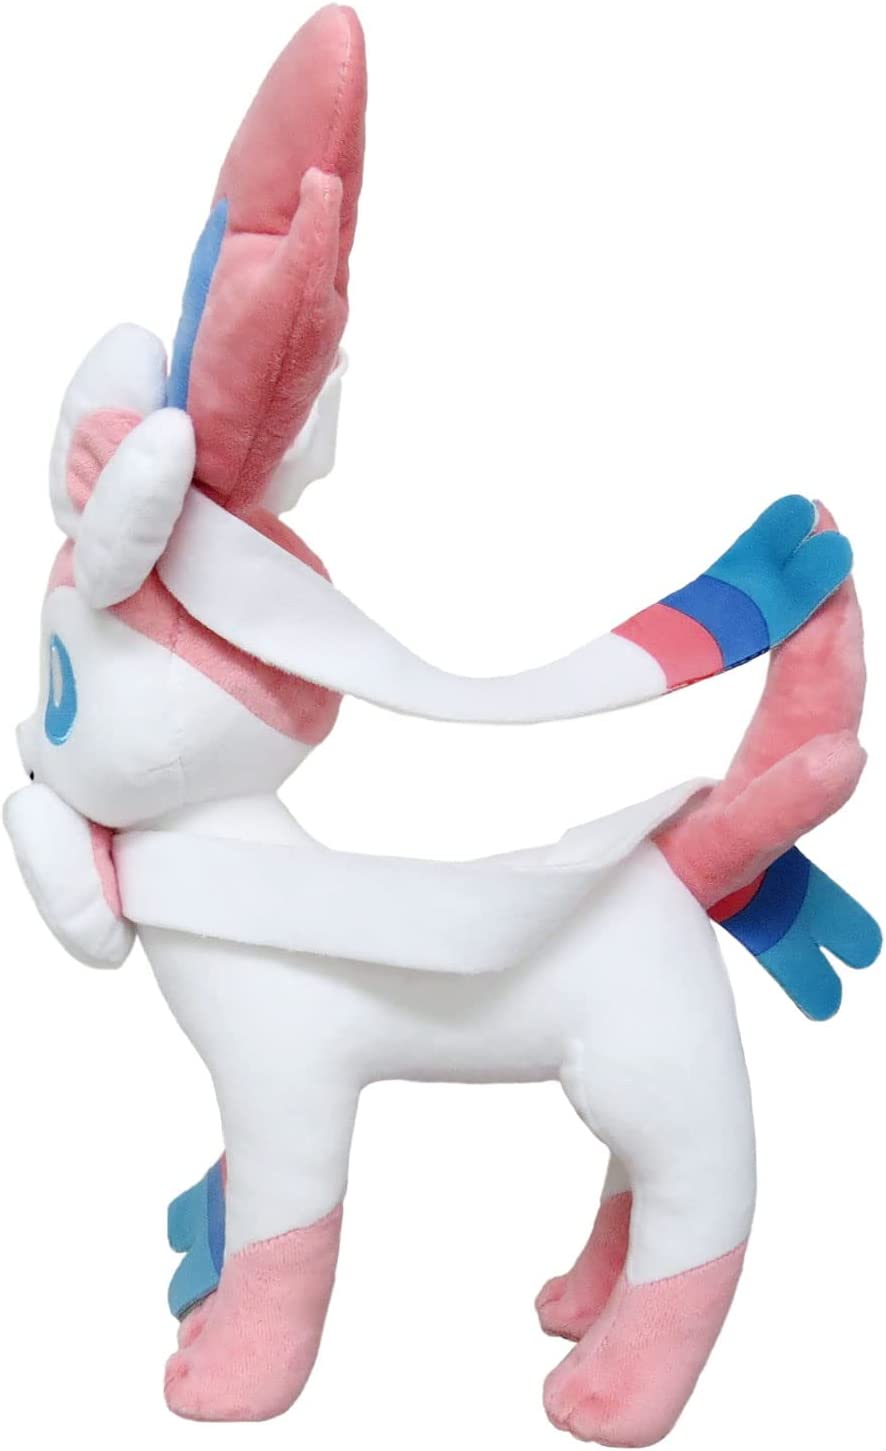 Sanei All Star Collection 12 Inch Plush - Sylveon (M) PP224